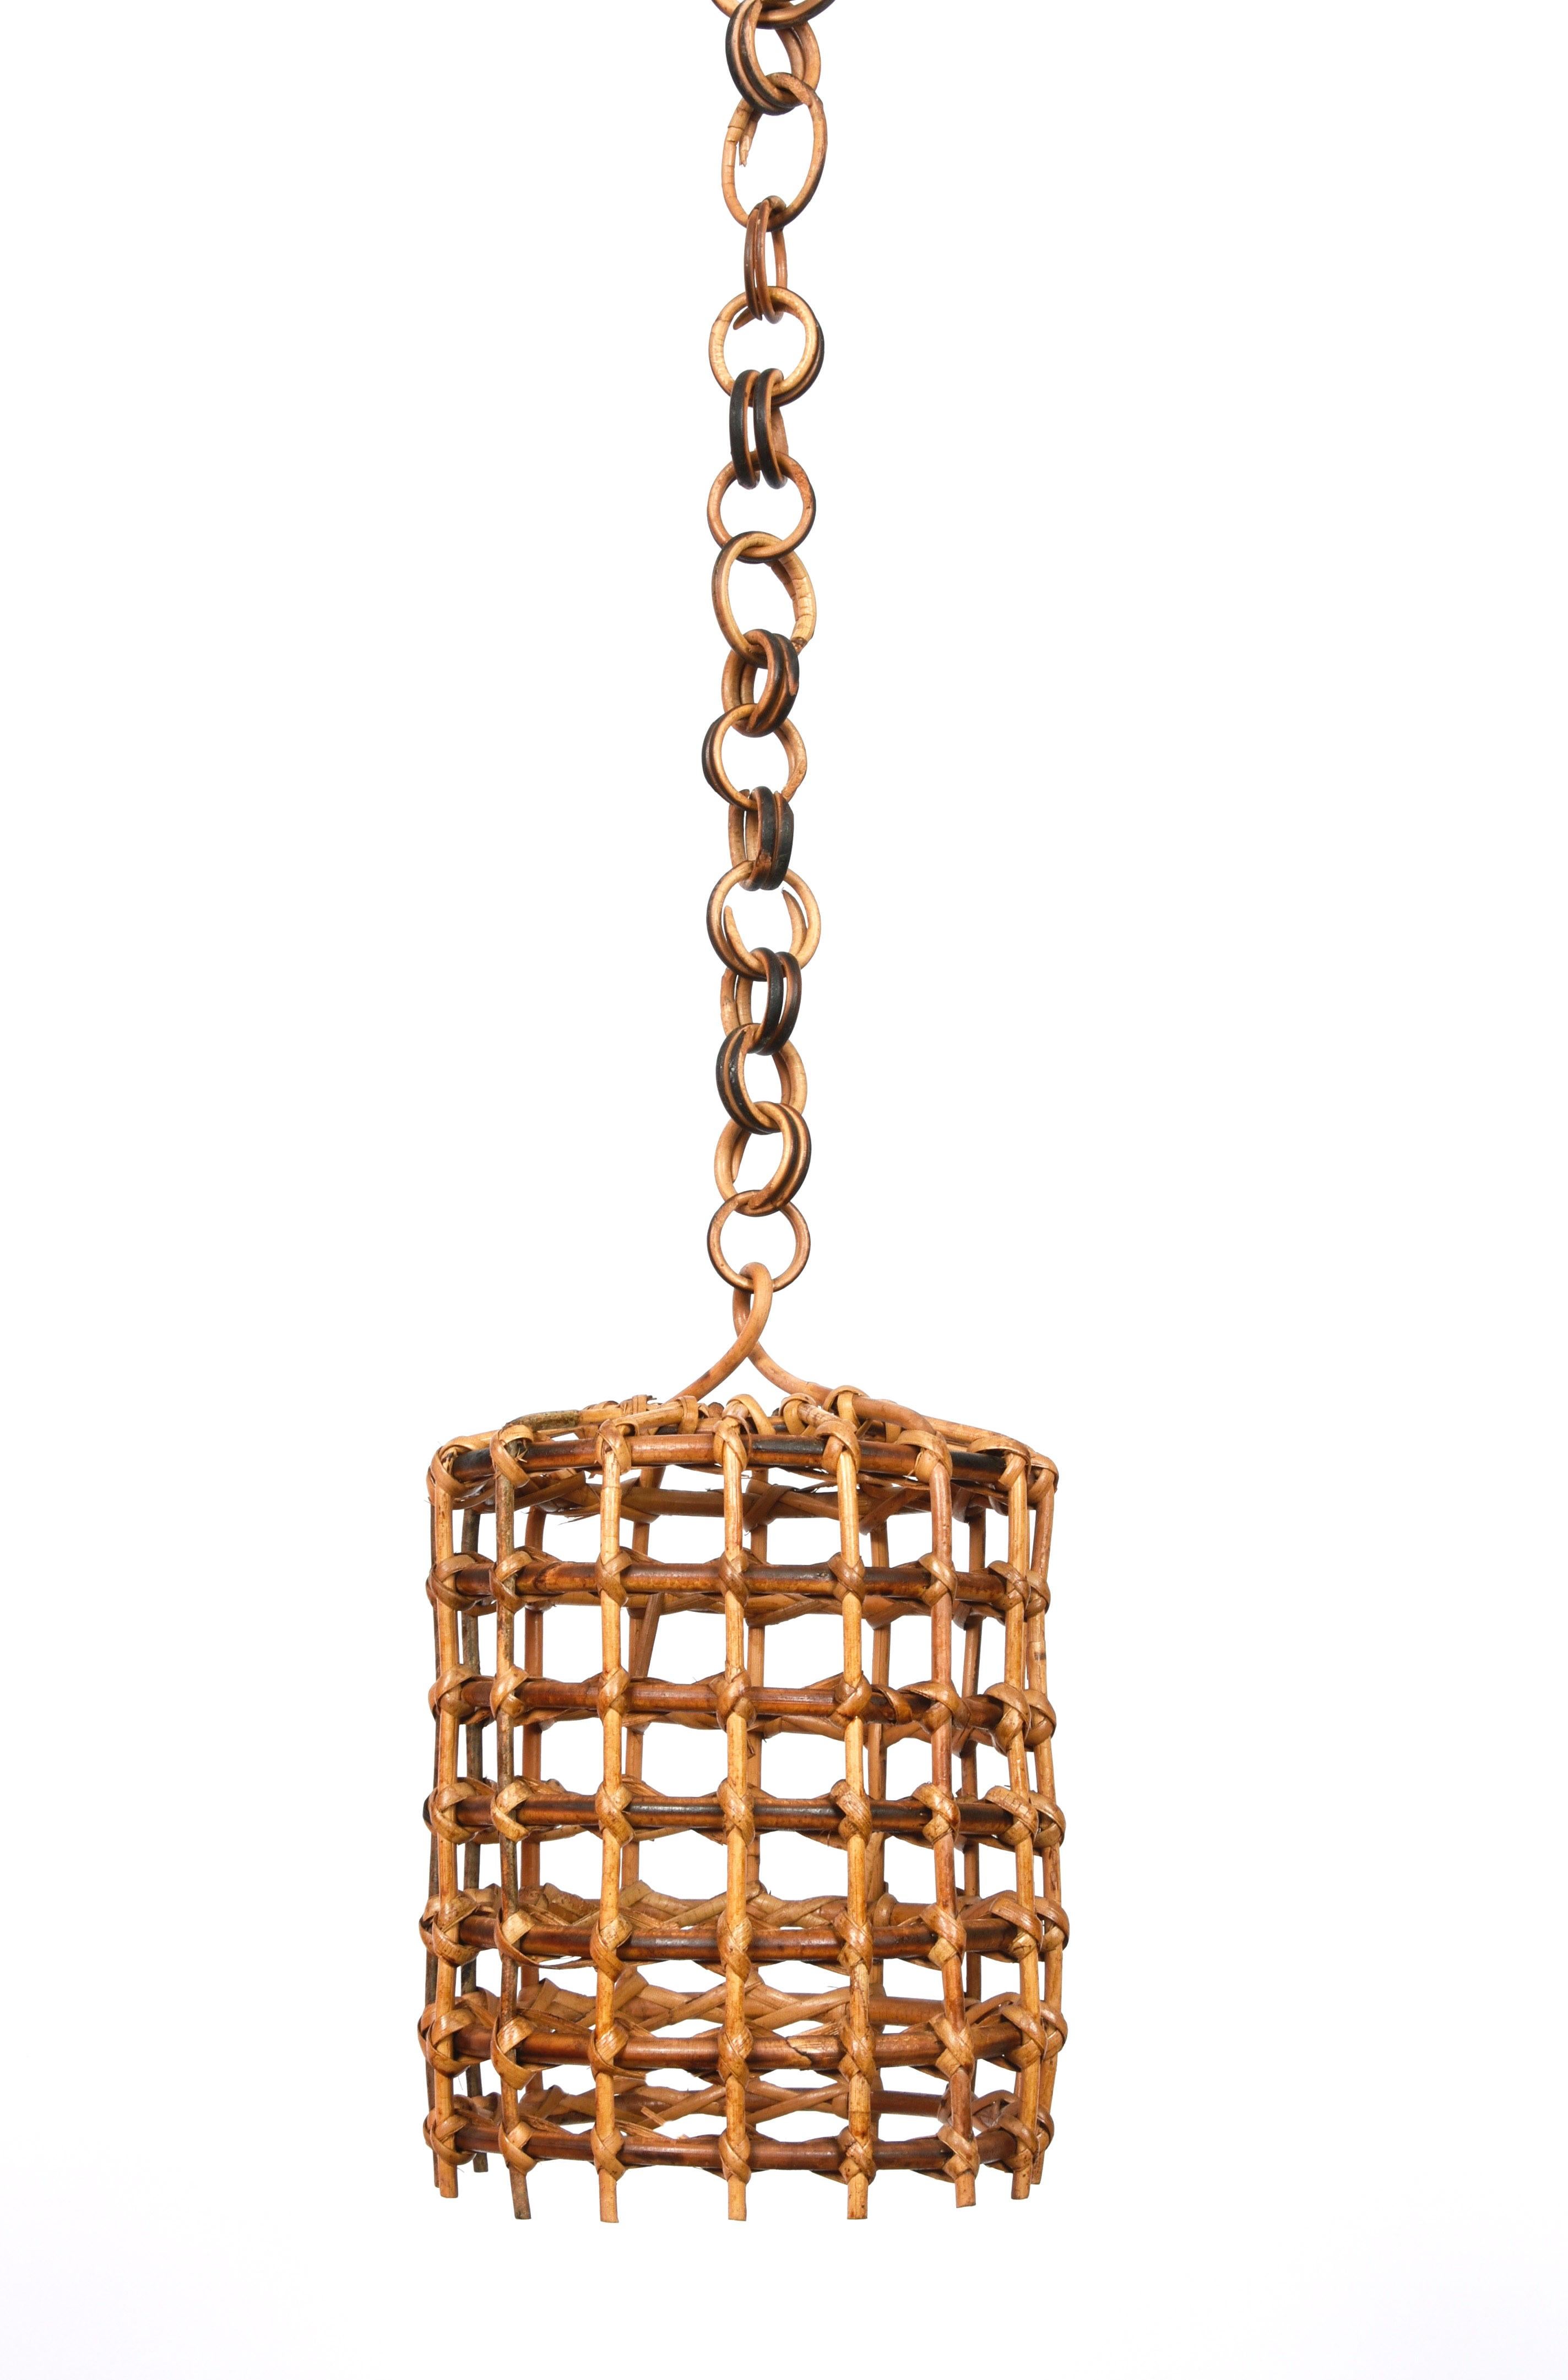 Midcentury French Riviera Bambo and Rattan Italian Chandelier, 1960s For Sale 3